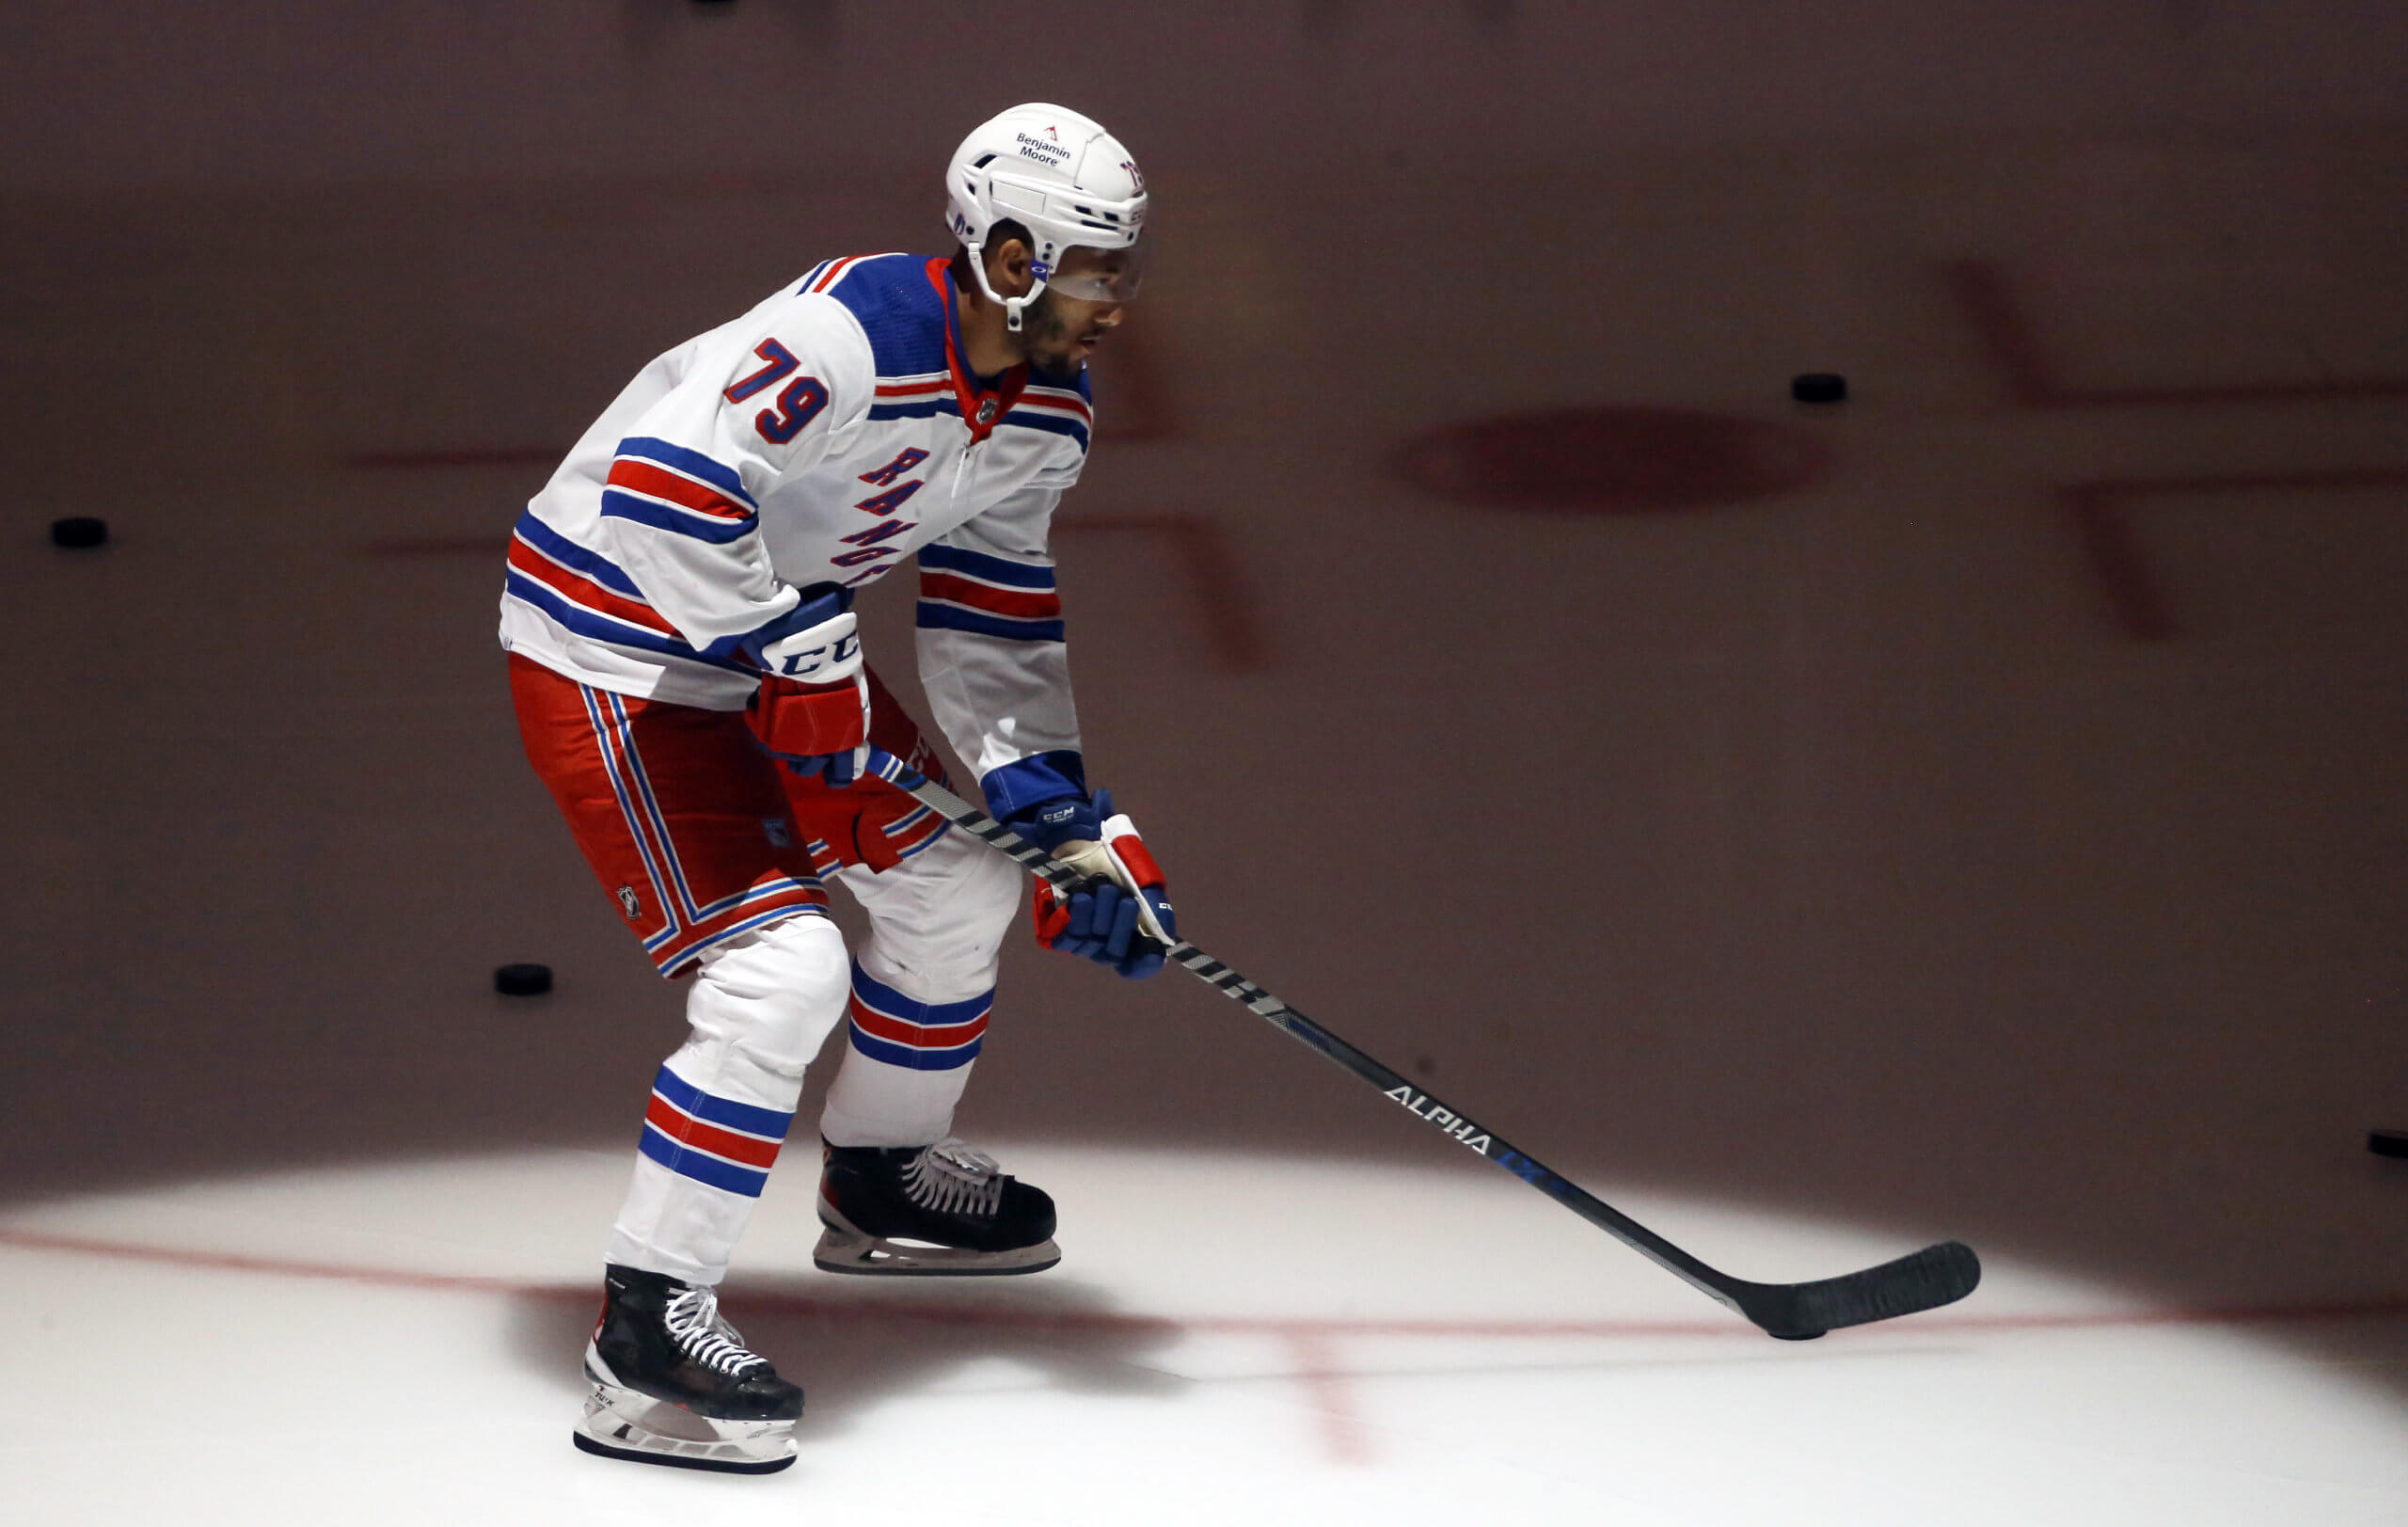 2022 Stanley Cup Playoff Preview: Rangers vs. Penguins